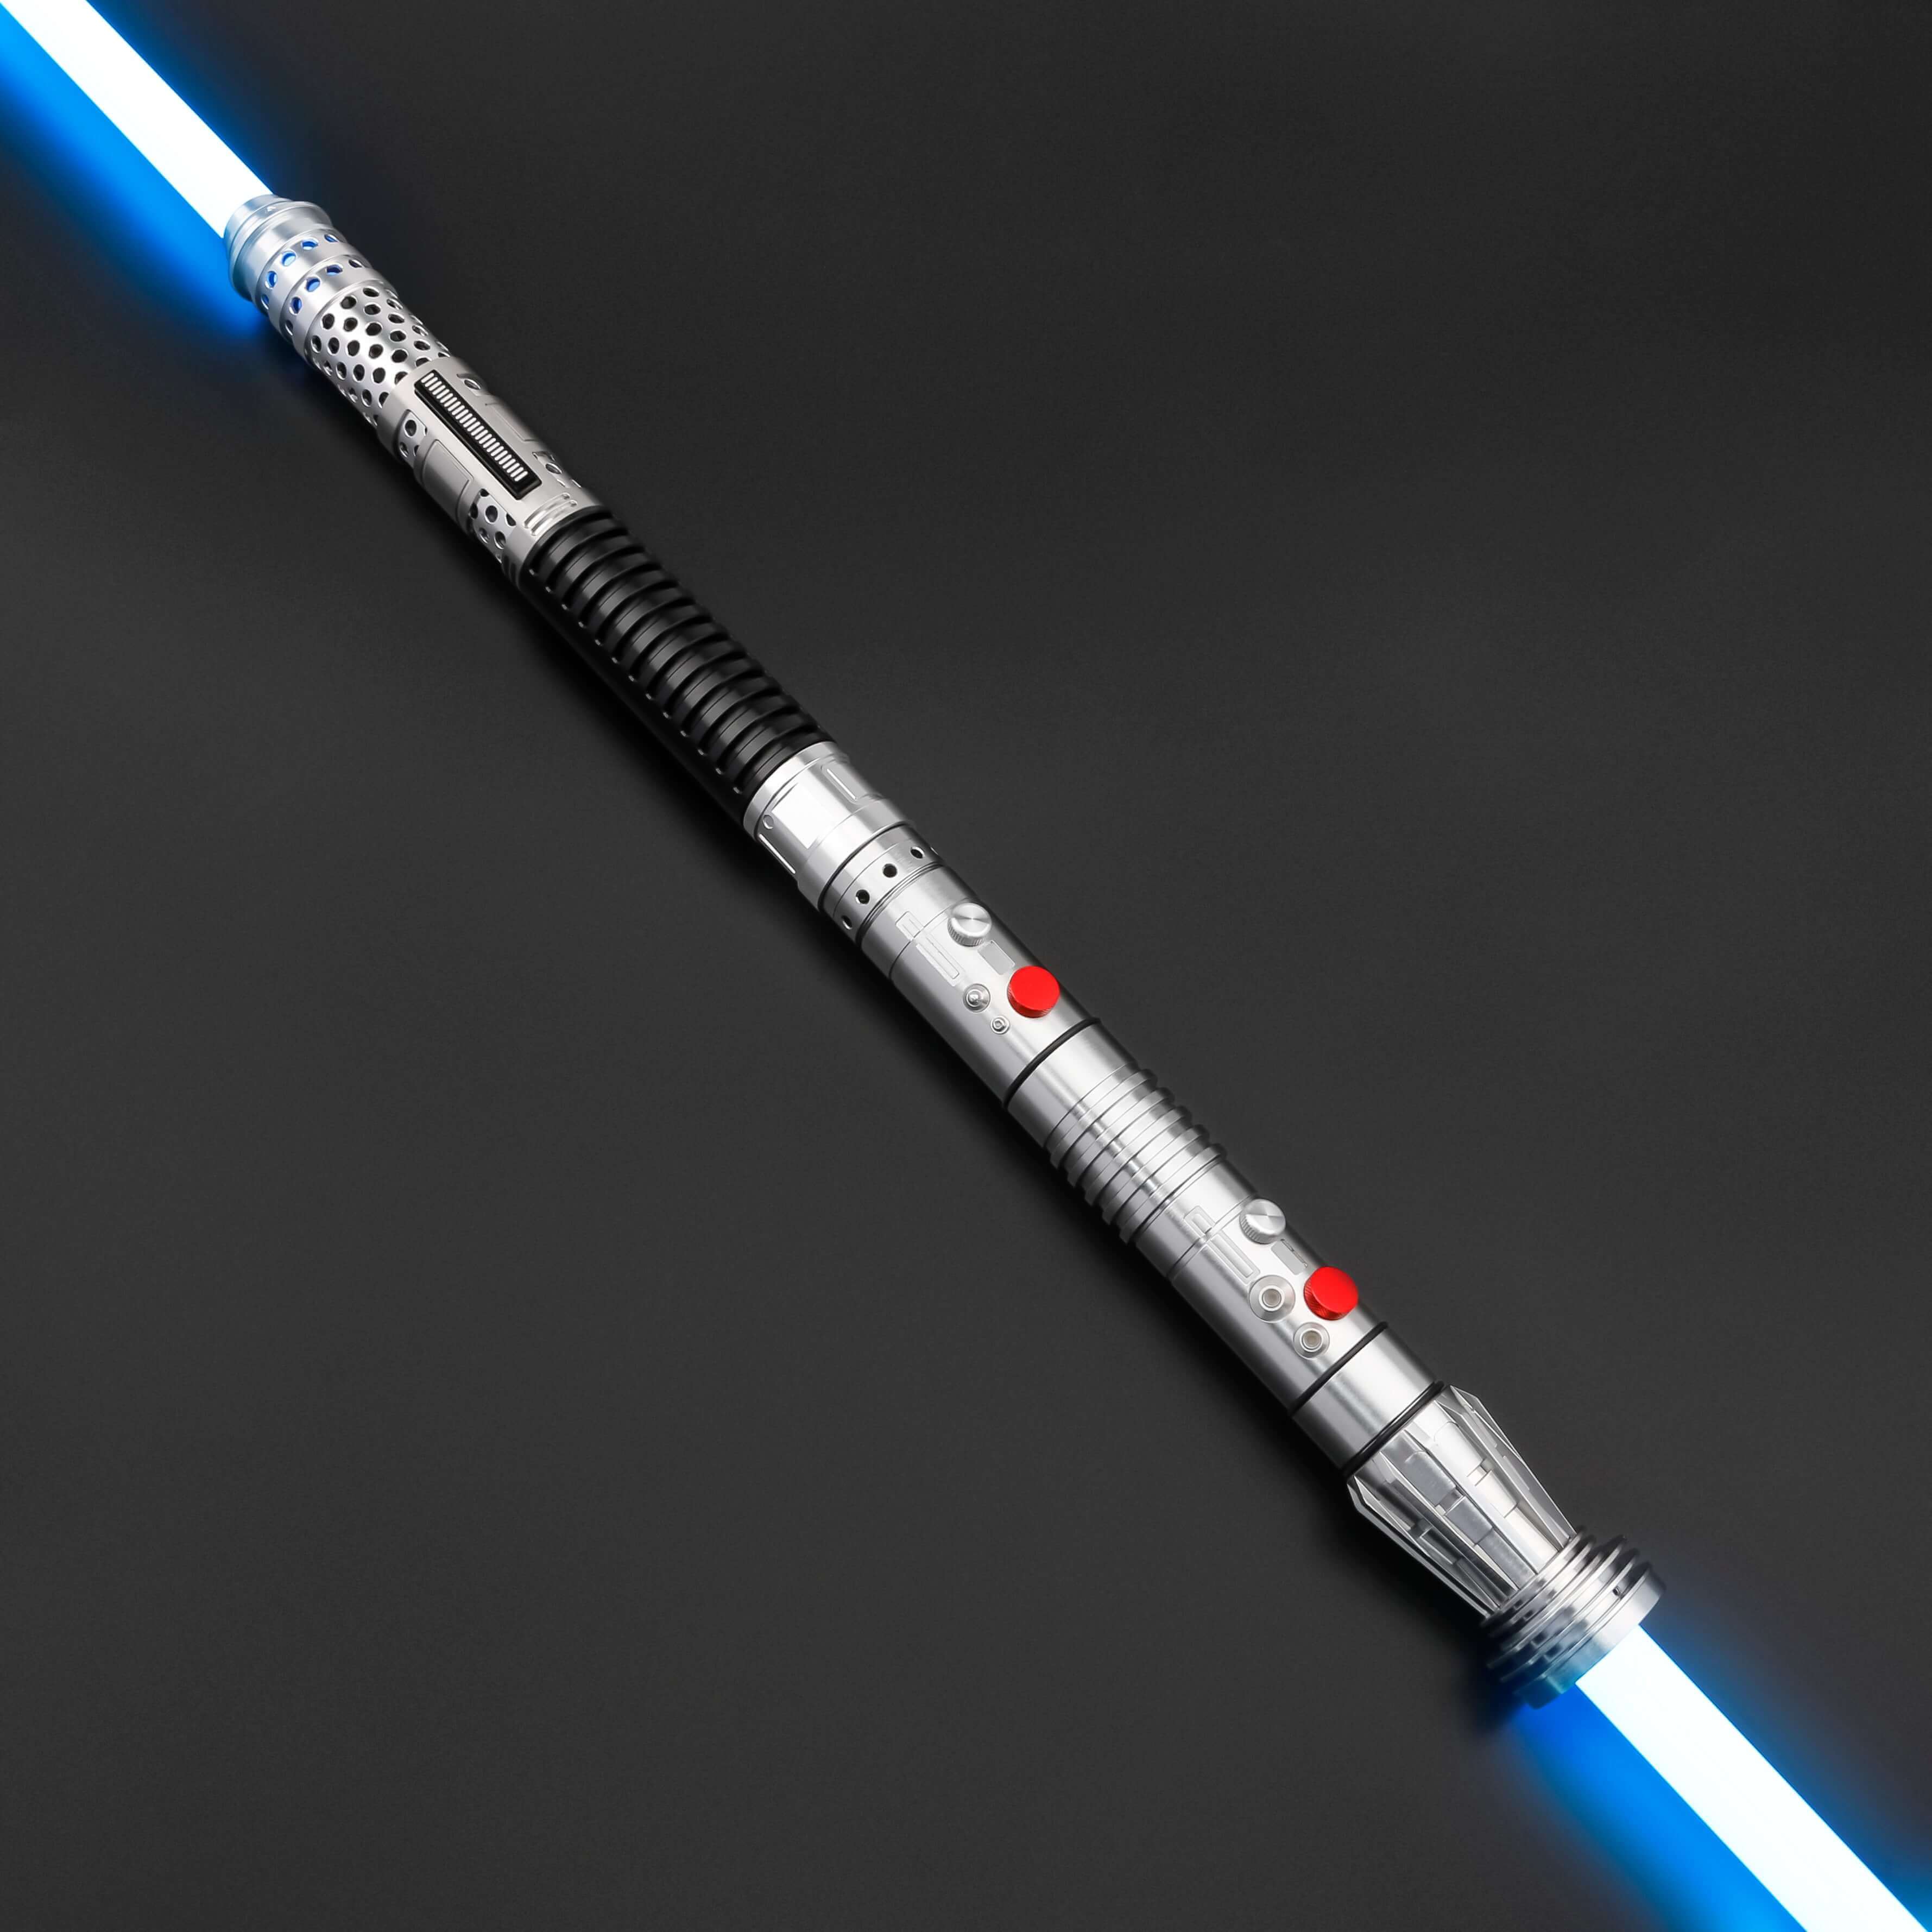 Ventress with Maul lightsaber | Nsabers